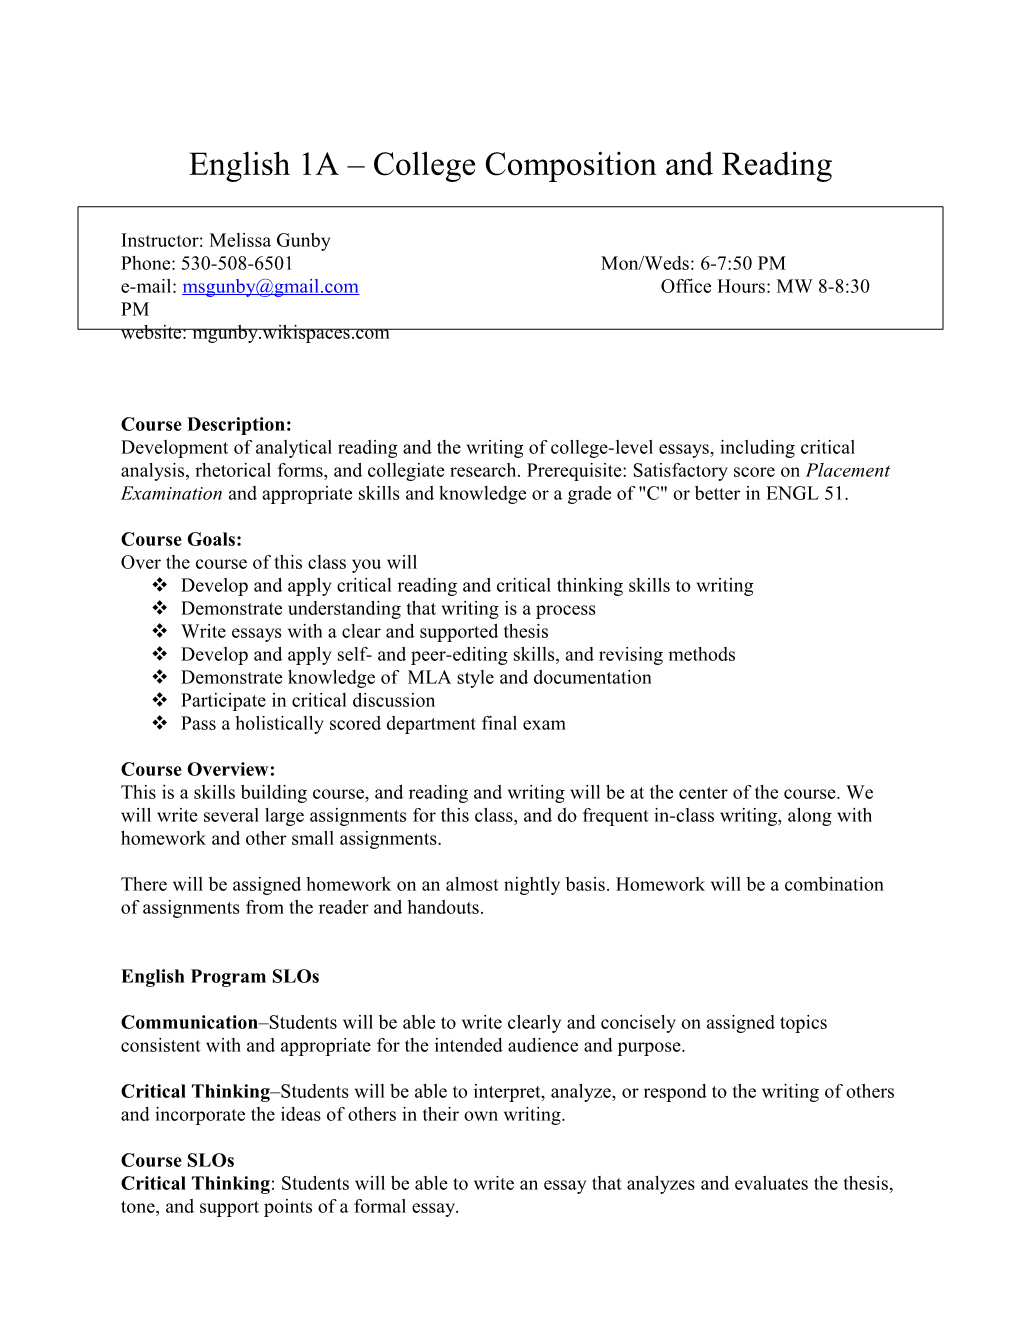 English 1A College Composition and Reading